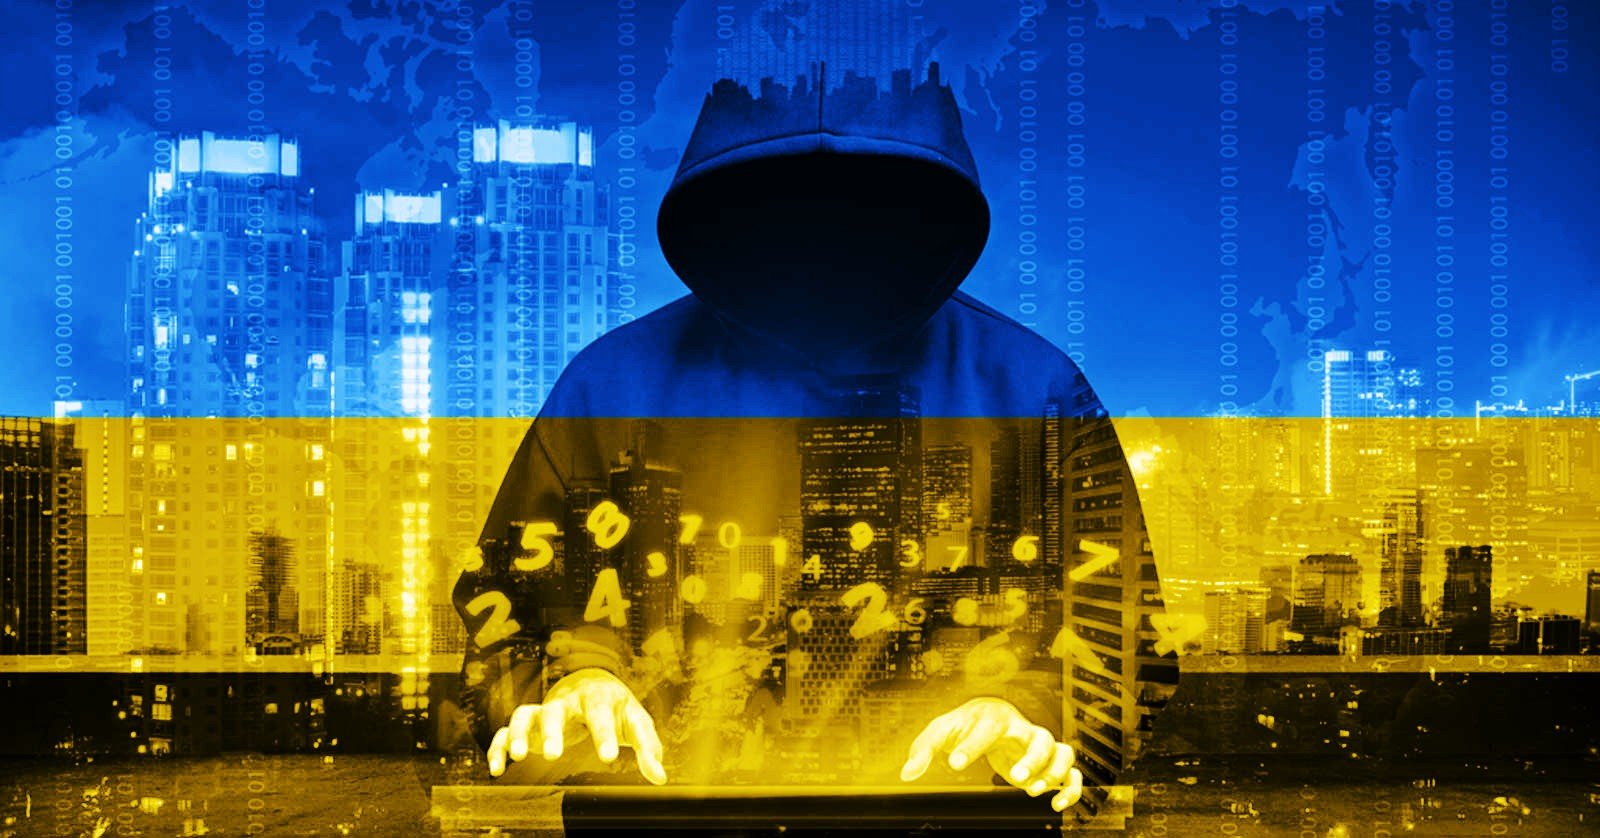 Ukraine claims it hacked Russian Ministry of Defense servers